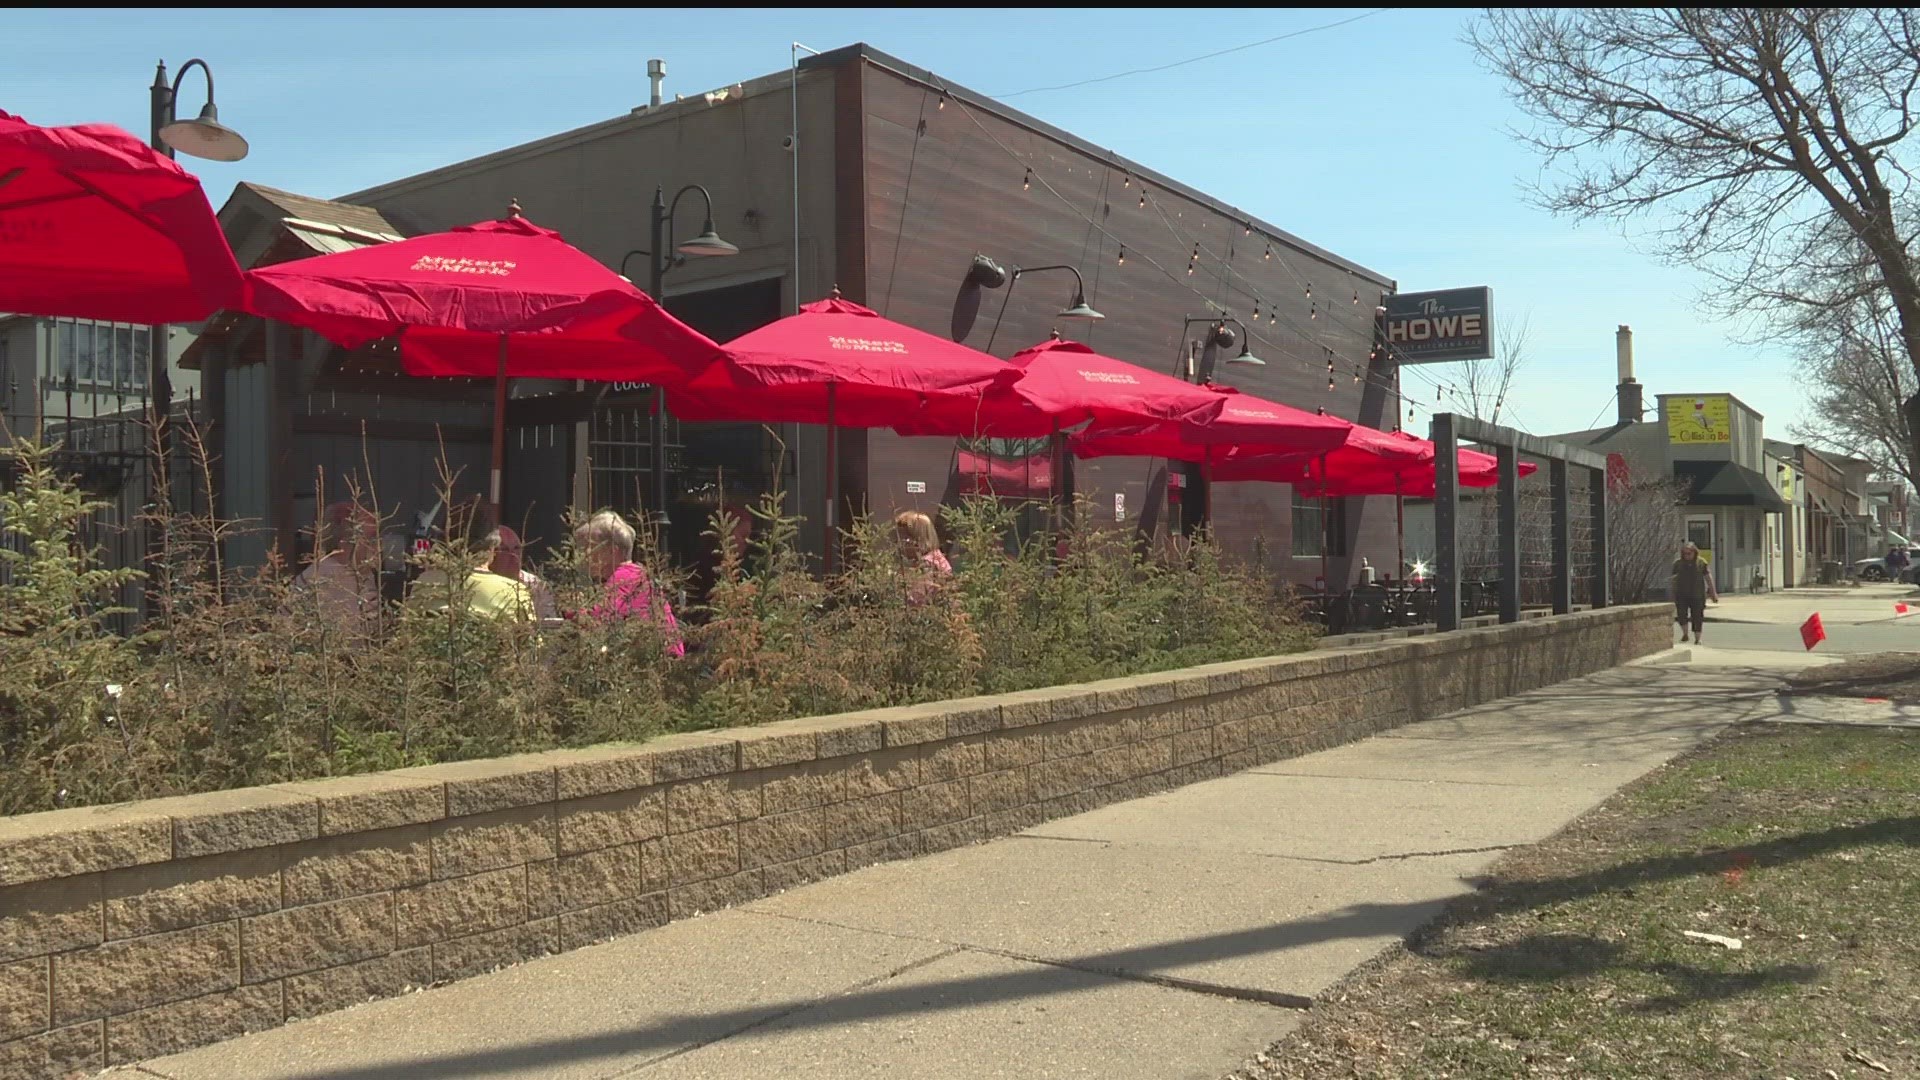 What comes with all this warmth? Patio season is returning to restaurants and bars in the Twin Cities metro area.